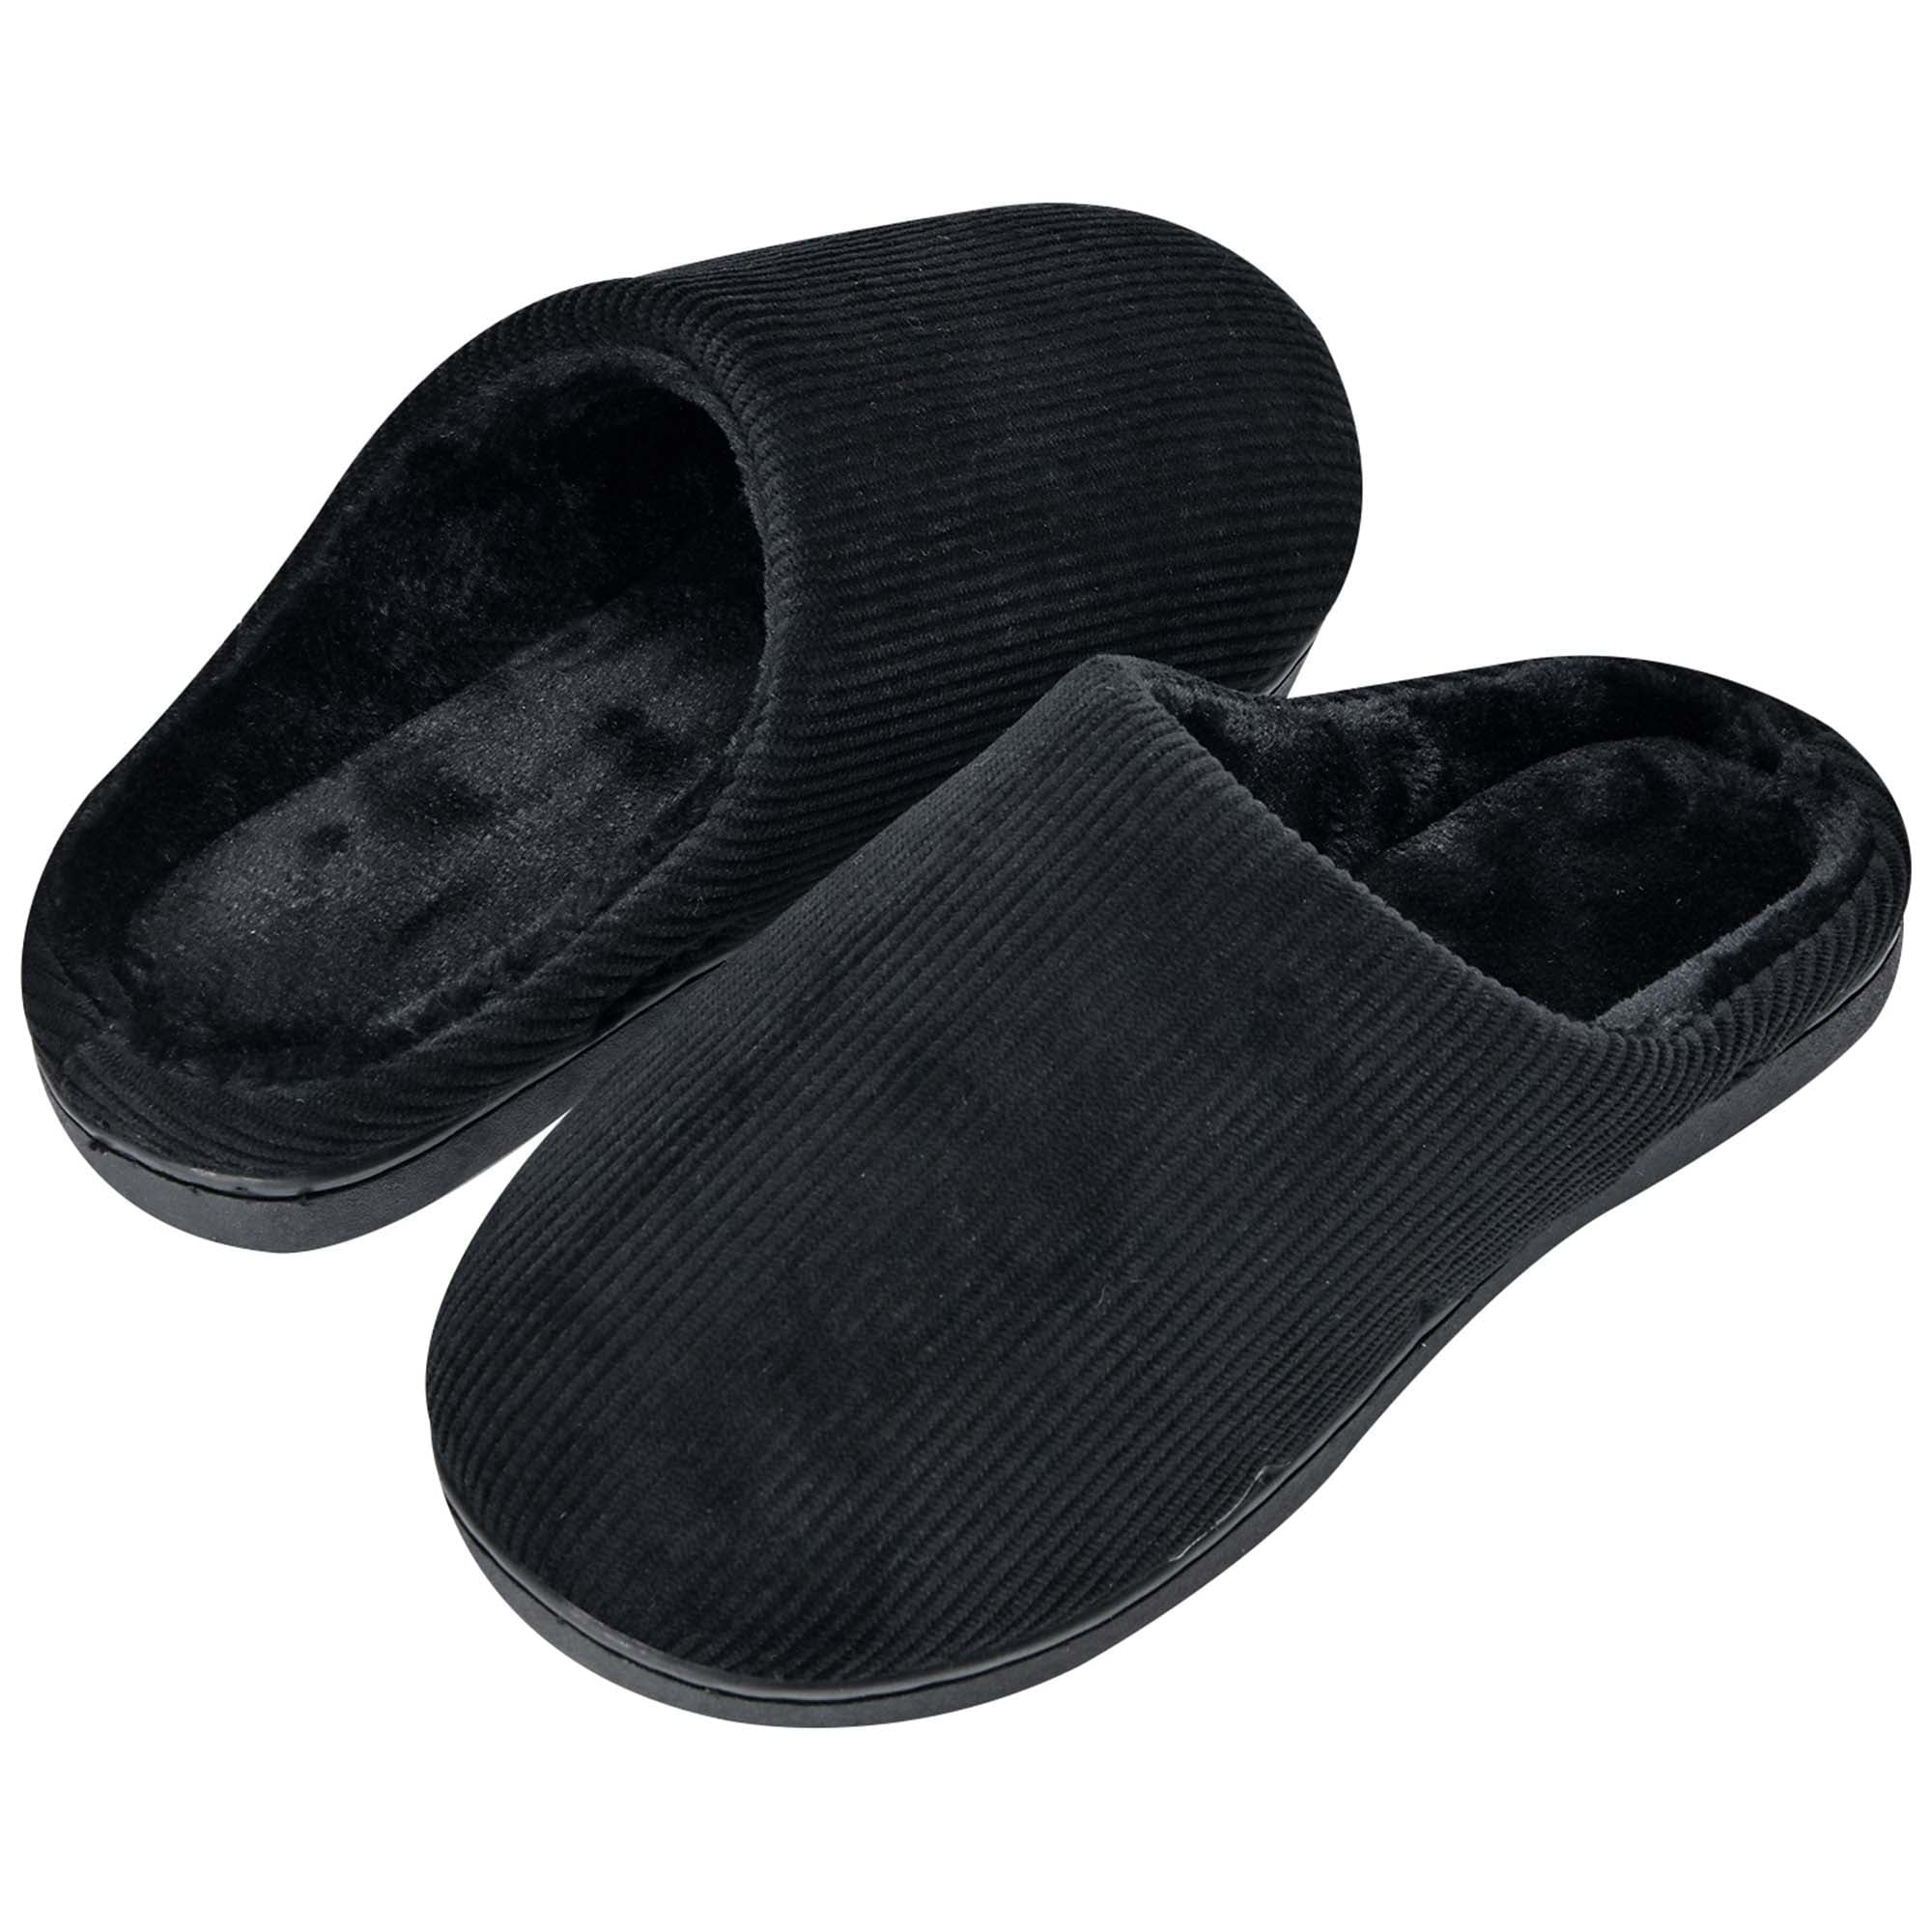 HomeTop Women's Comfort Cotton Knit Memory Foam House Shoes Light Weight  Terry Cloth Loafer Slippers - Walmart.com